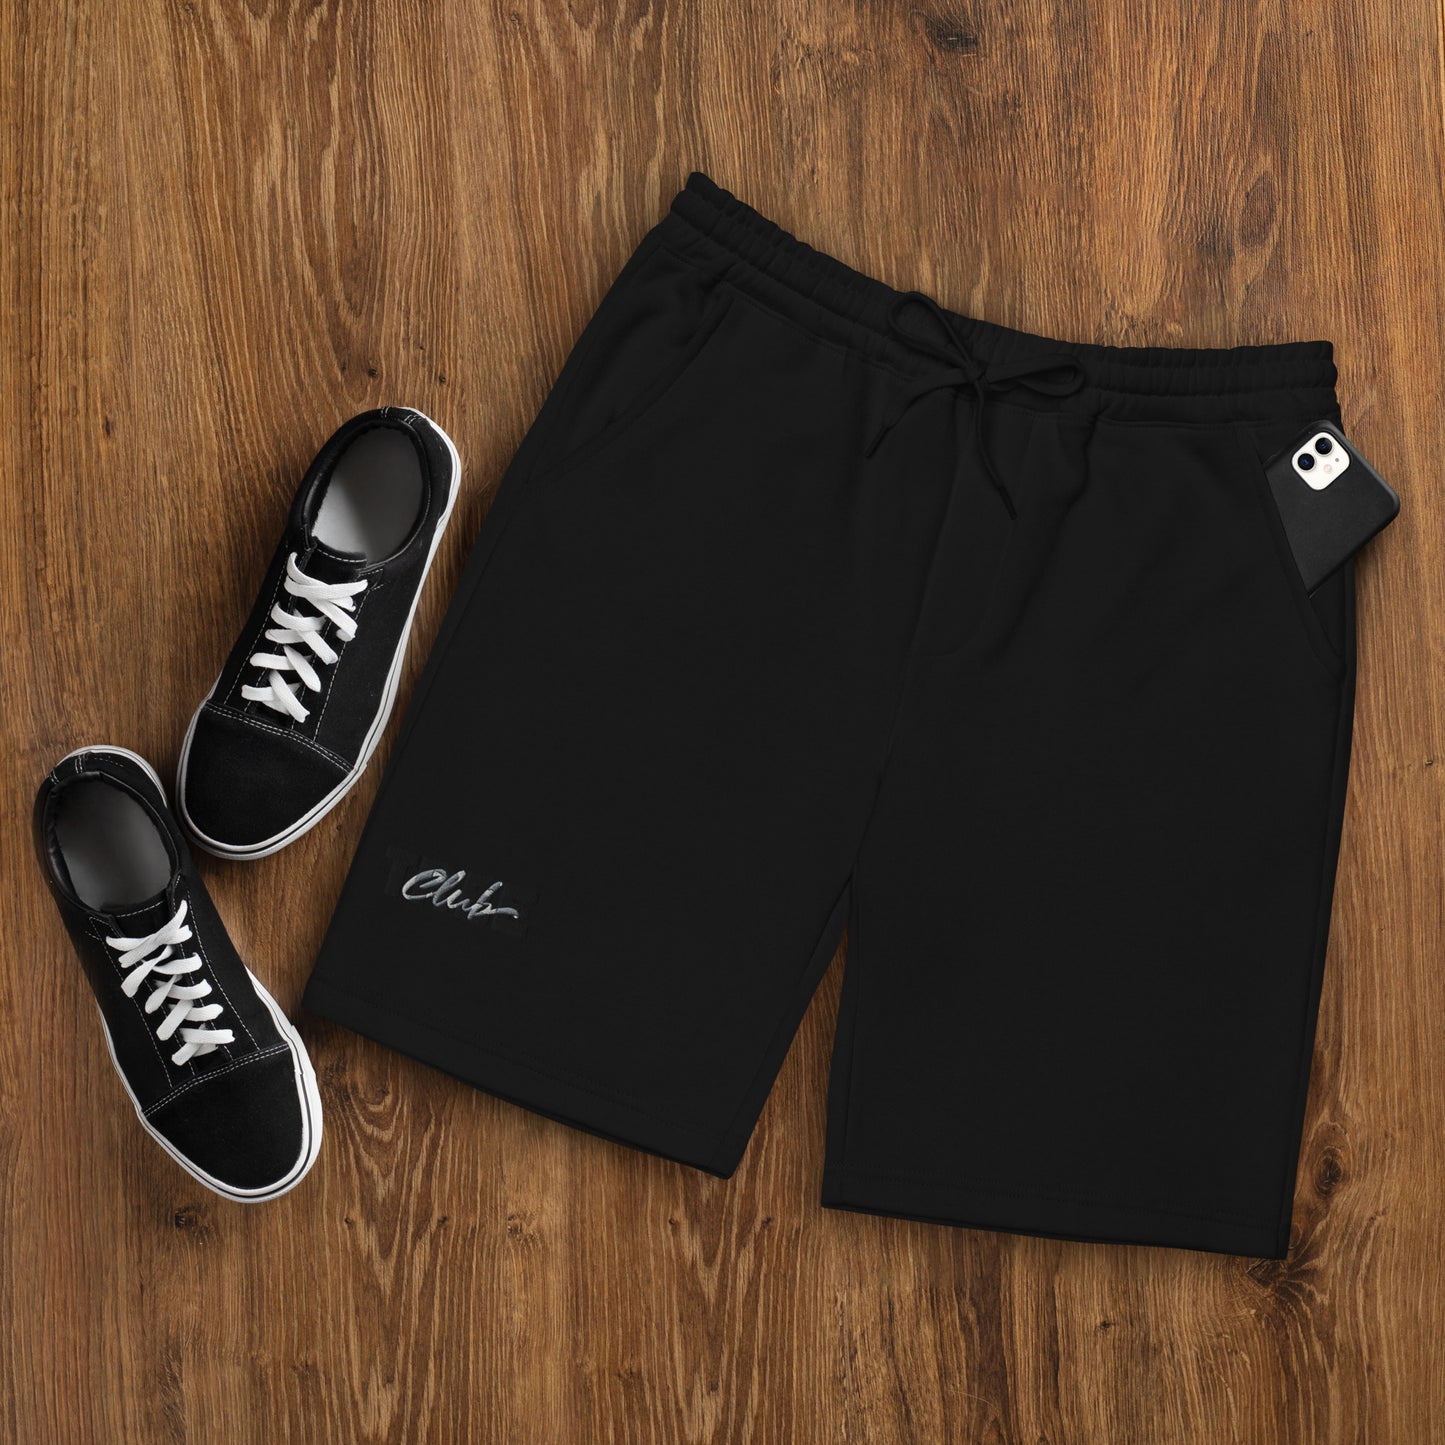 Tree Club Comfy embroidered shorts